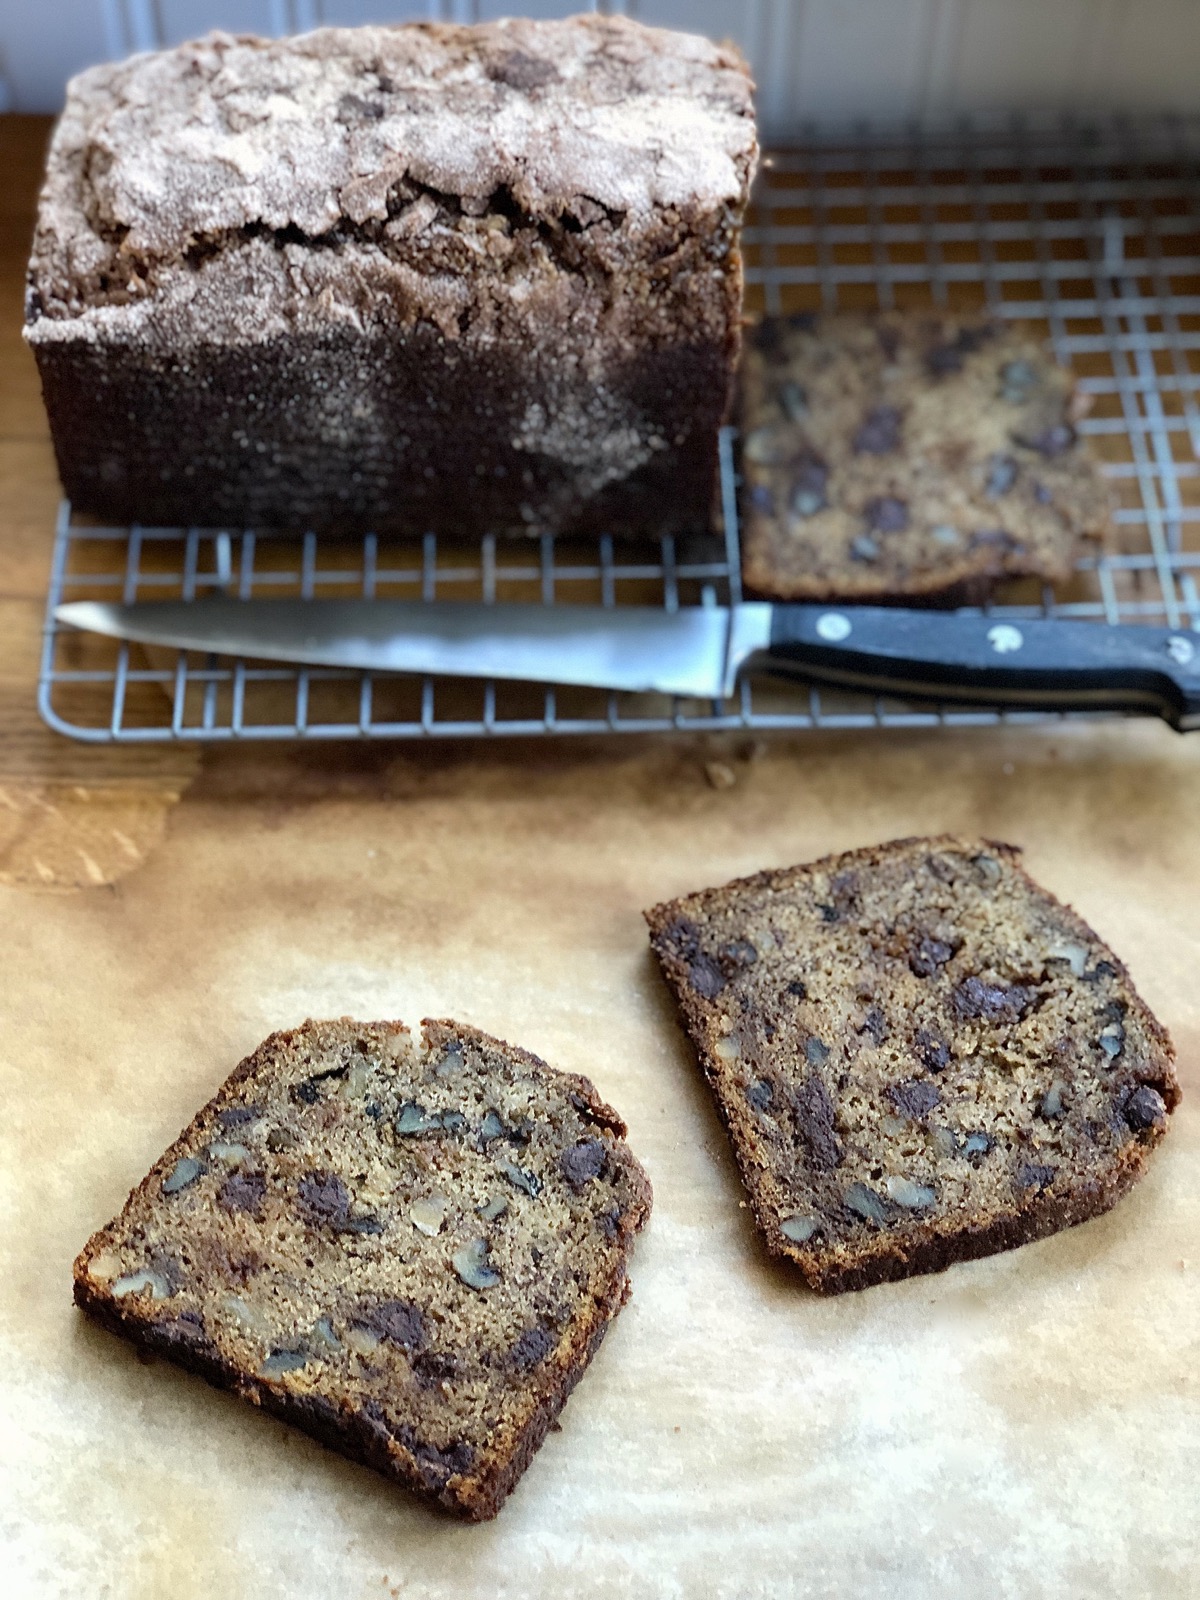 Slices of whole grain banana bread with added chocolate chips and chopped walnuts.